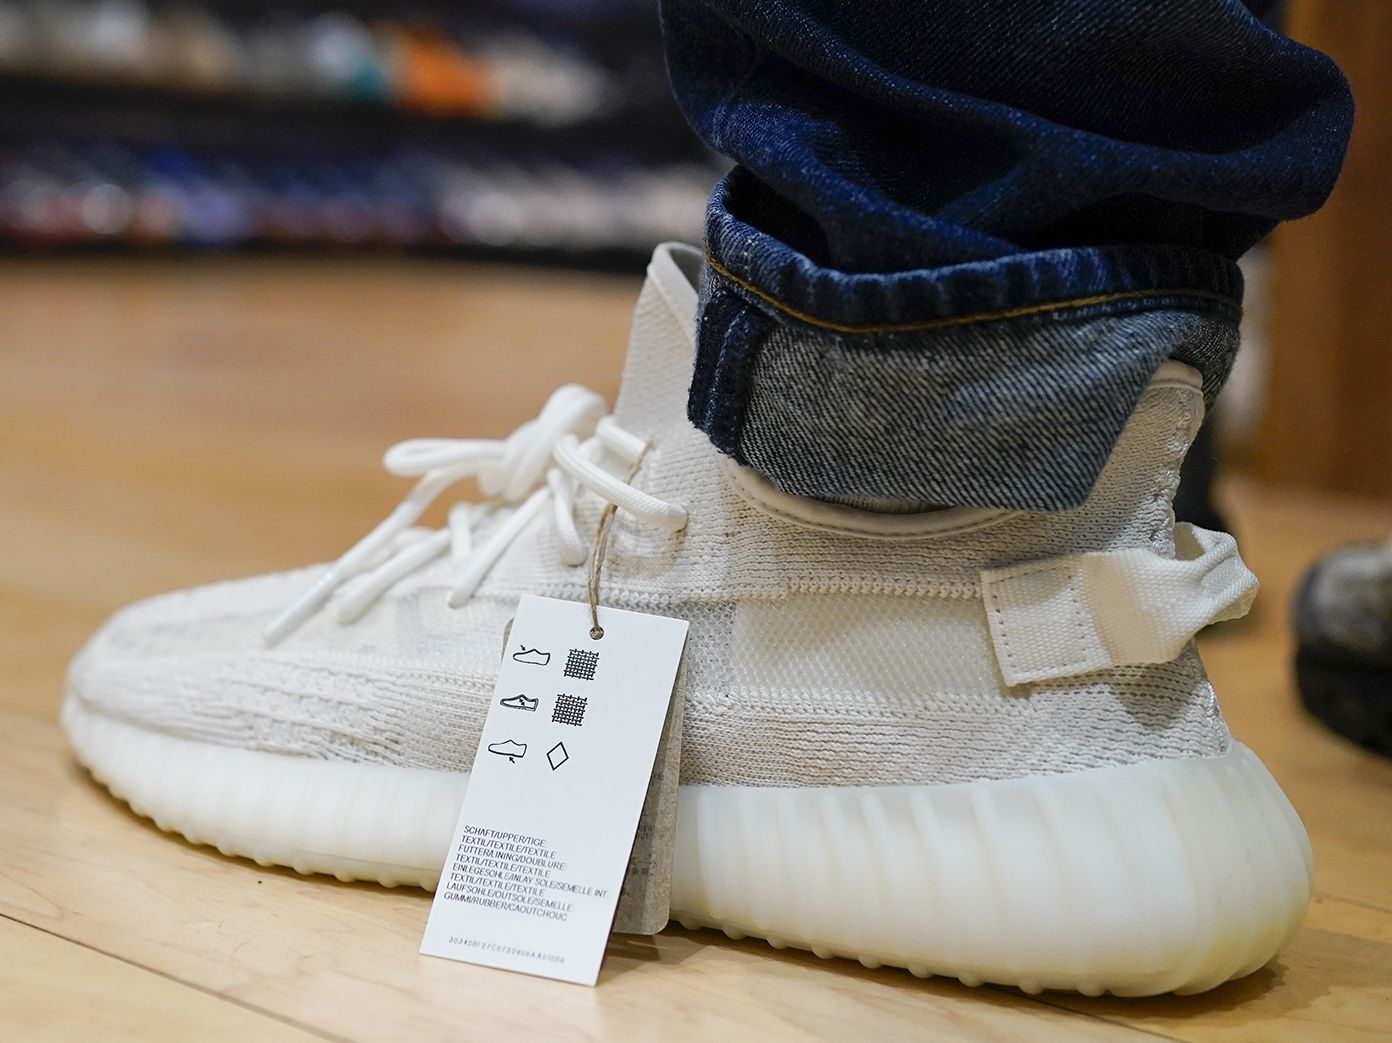 Cliente Desprecio Guardia Adidas will continue to sell Kanye West's shoe designs without the Yeezy  name | CNN Business